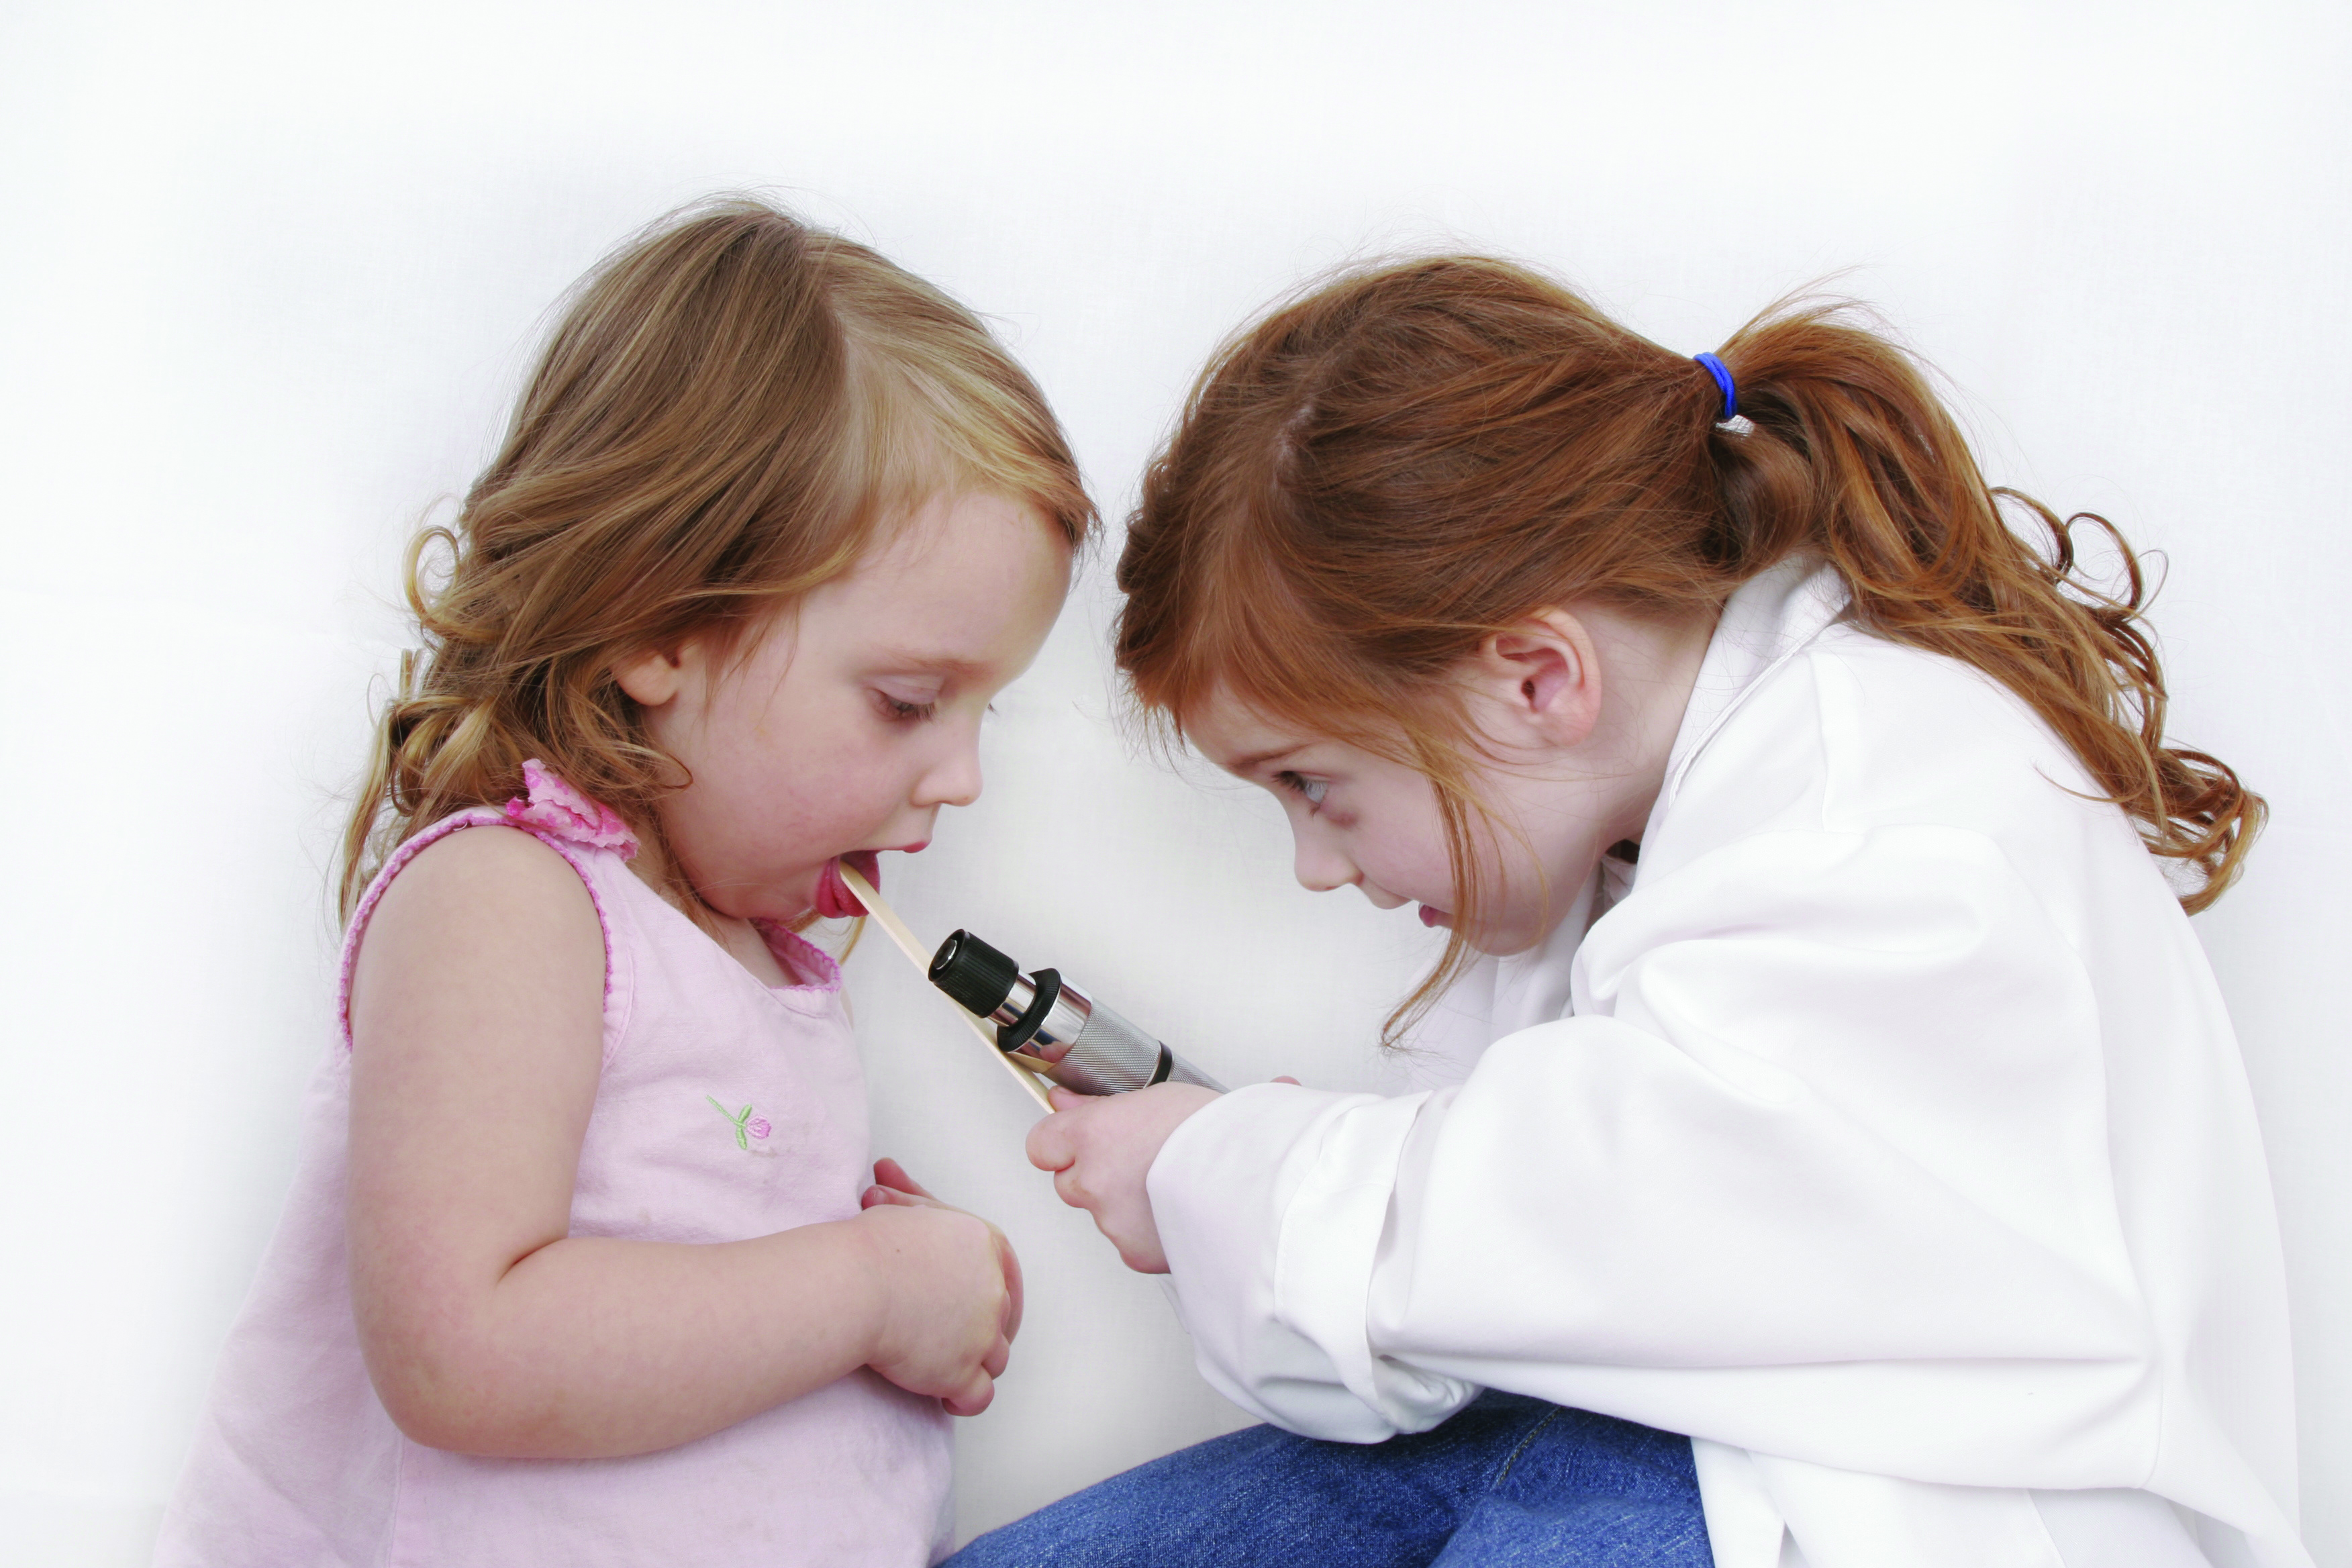 Two girls playing doctors